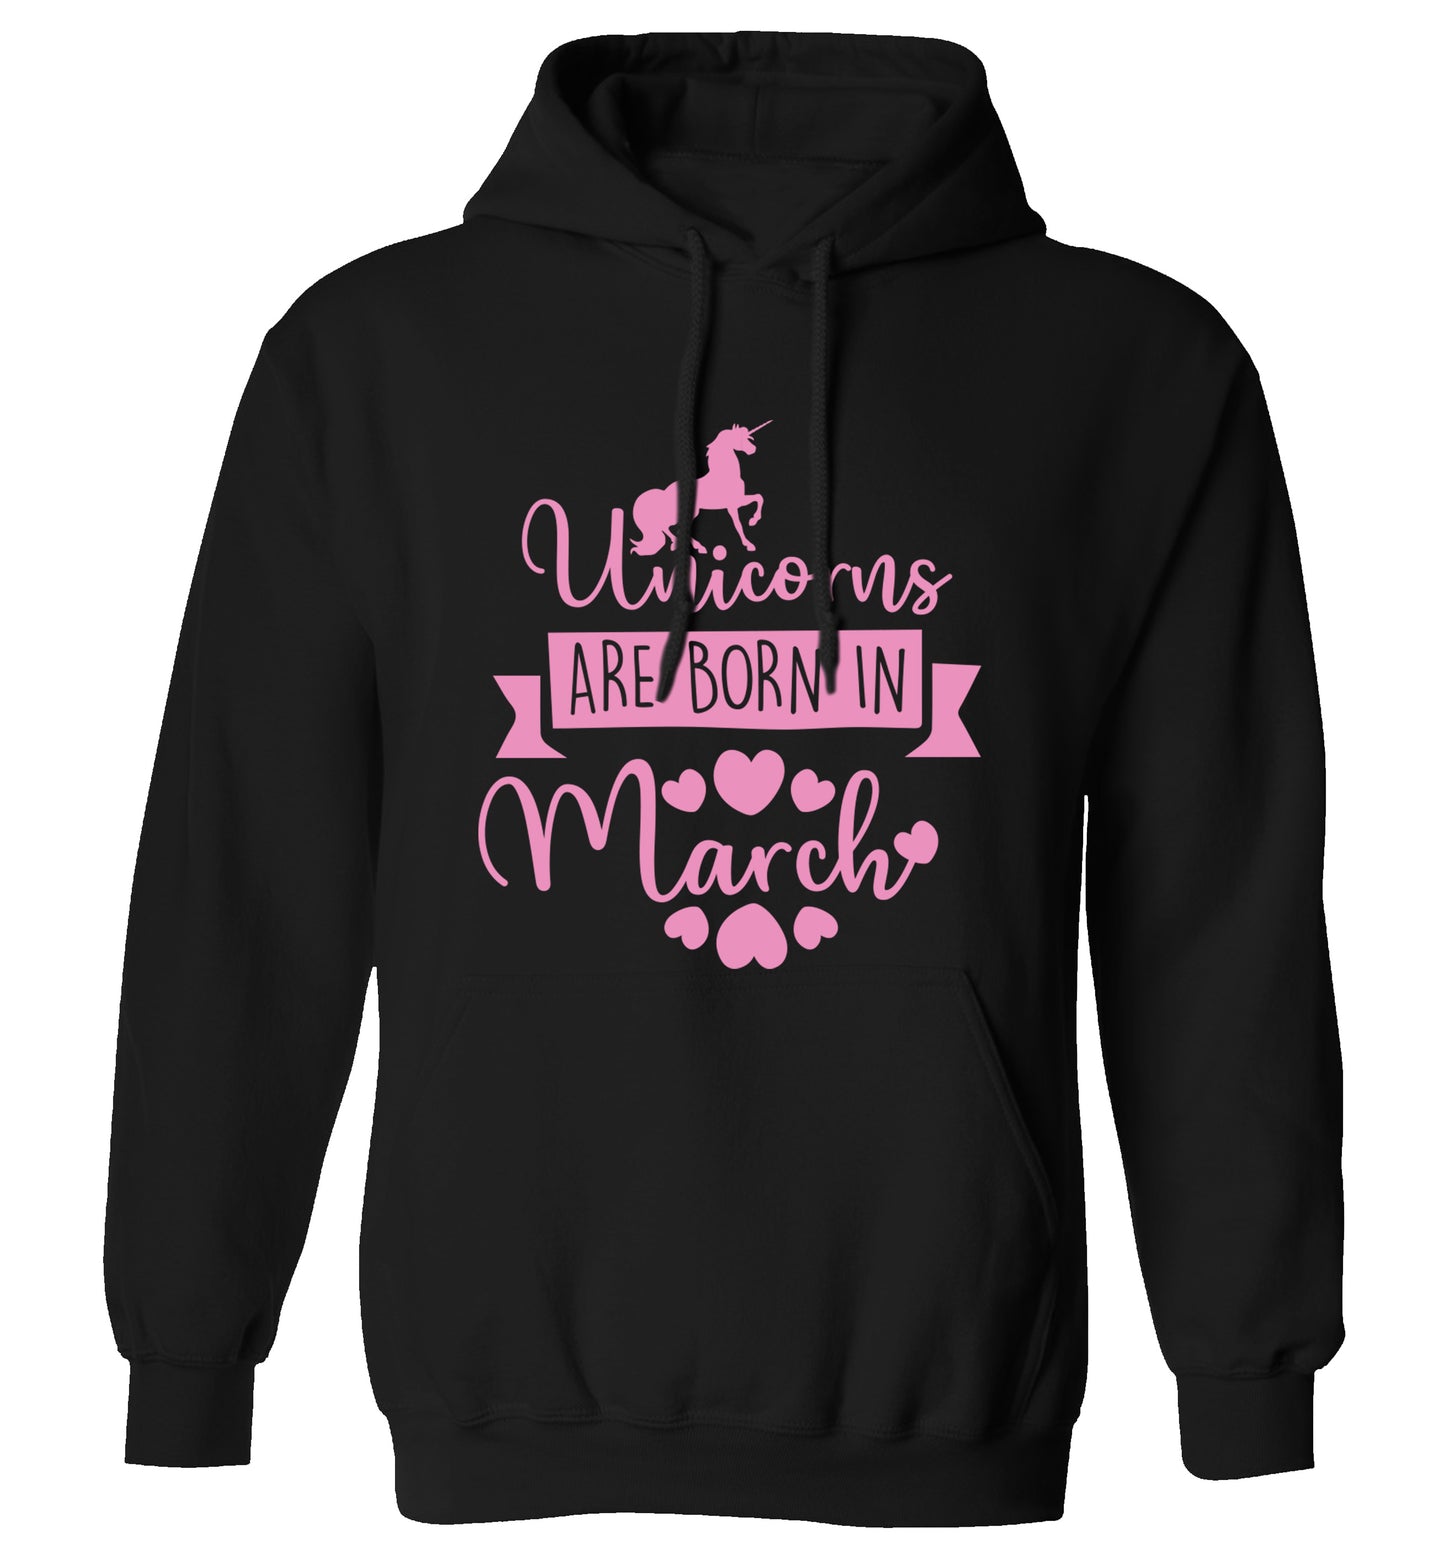 Unicorns are born in March adults unisex black hoodie 2XL